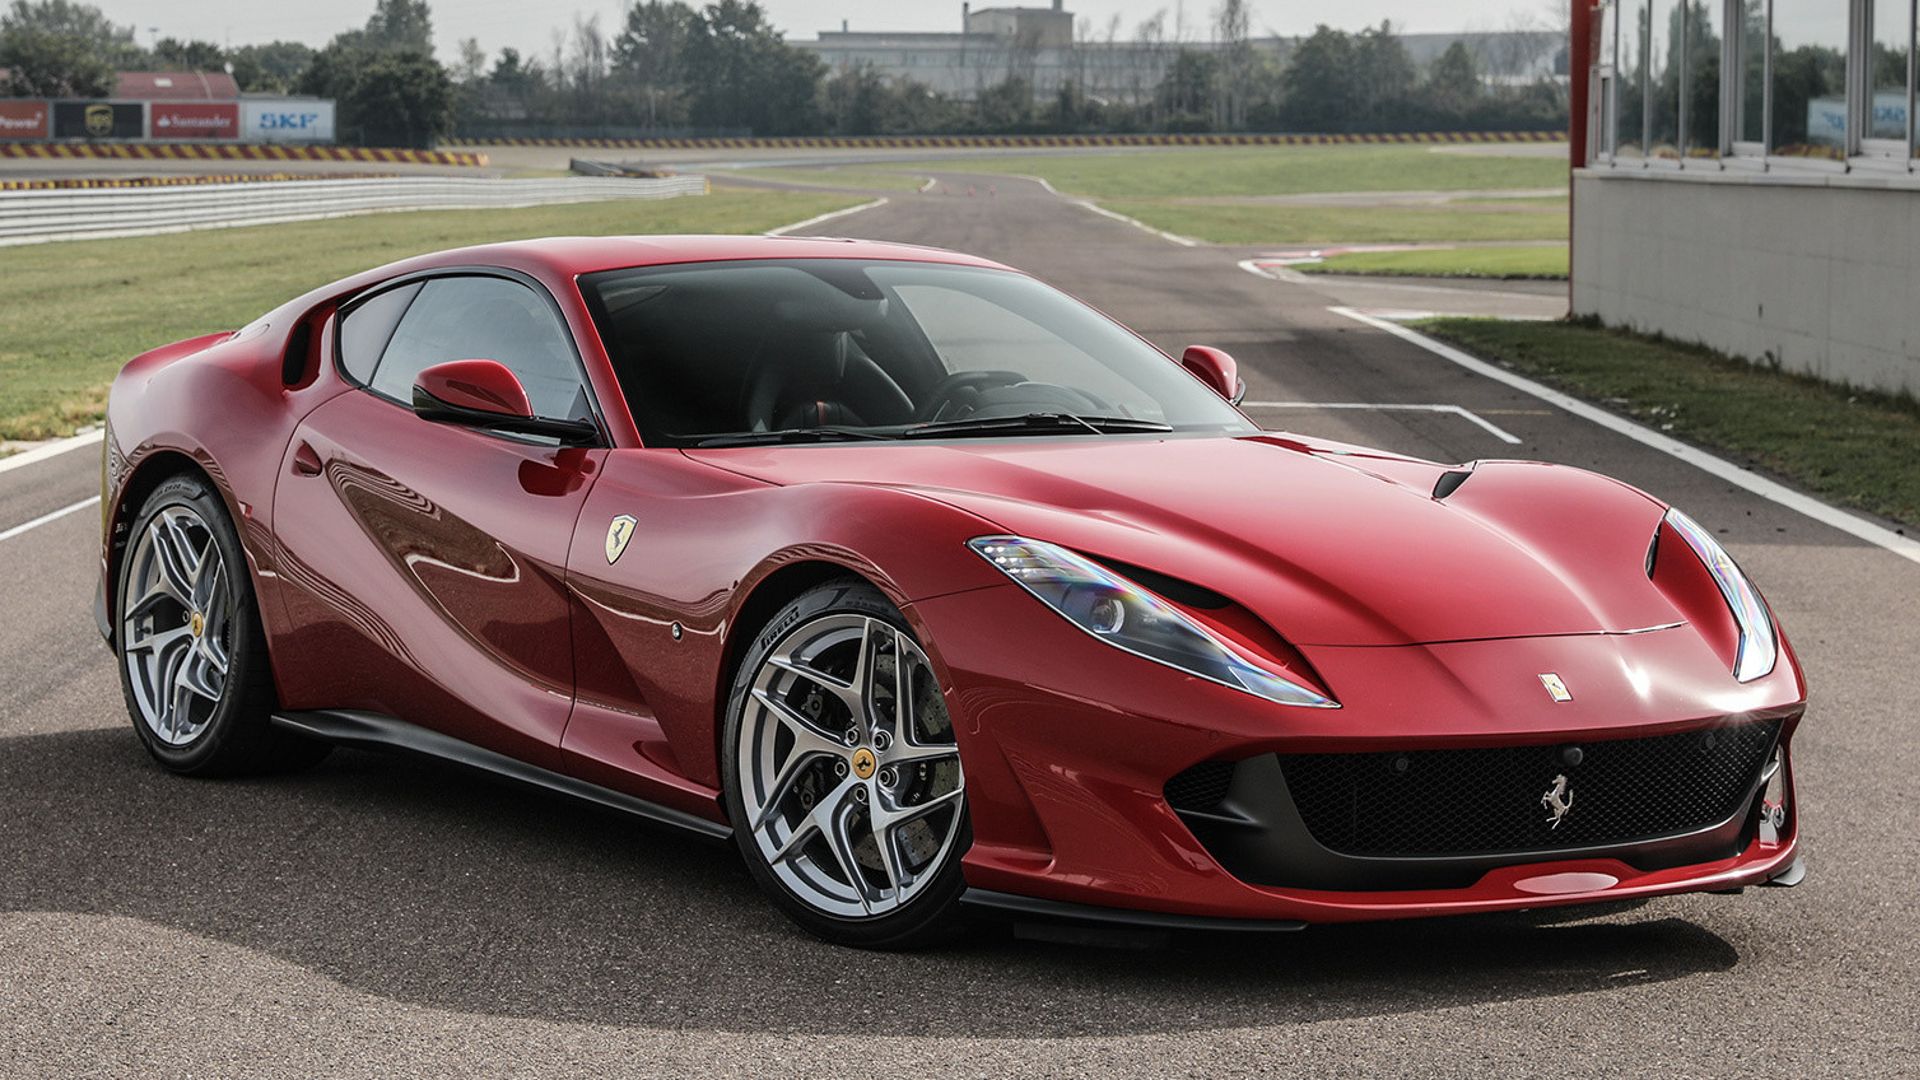 Three-quarter view of red Ferrari 812 Superfast parked on a race track